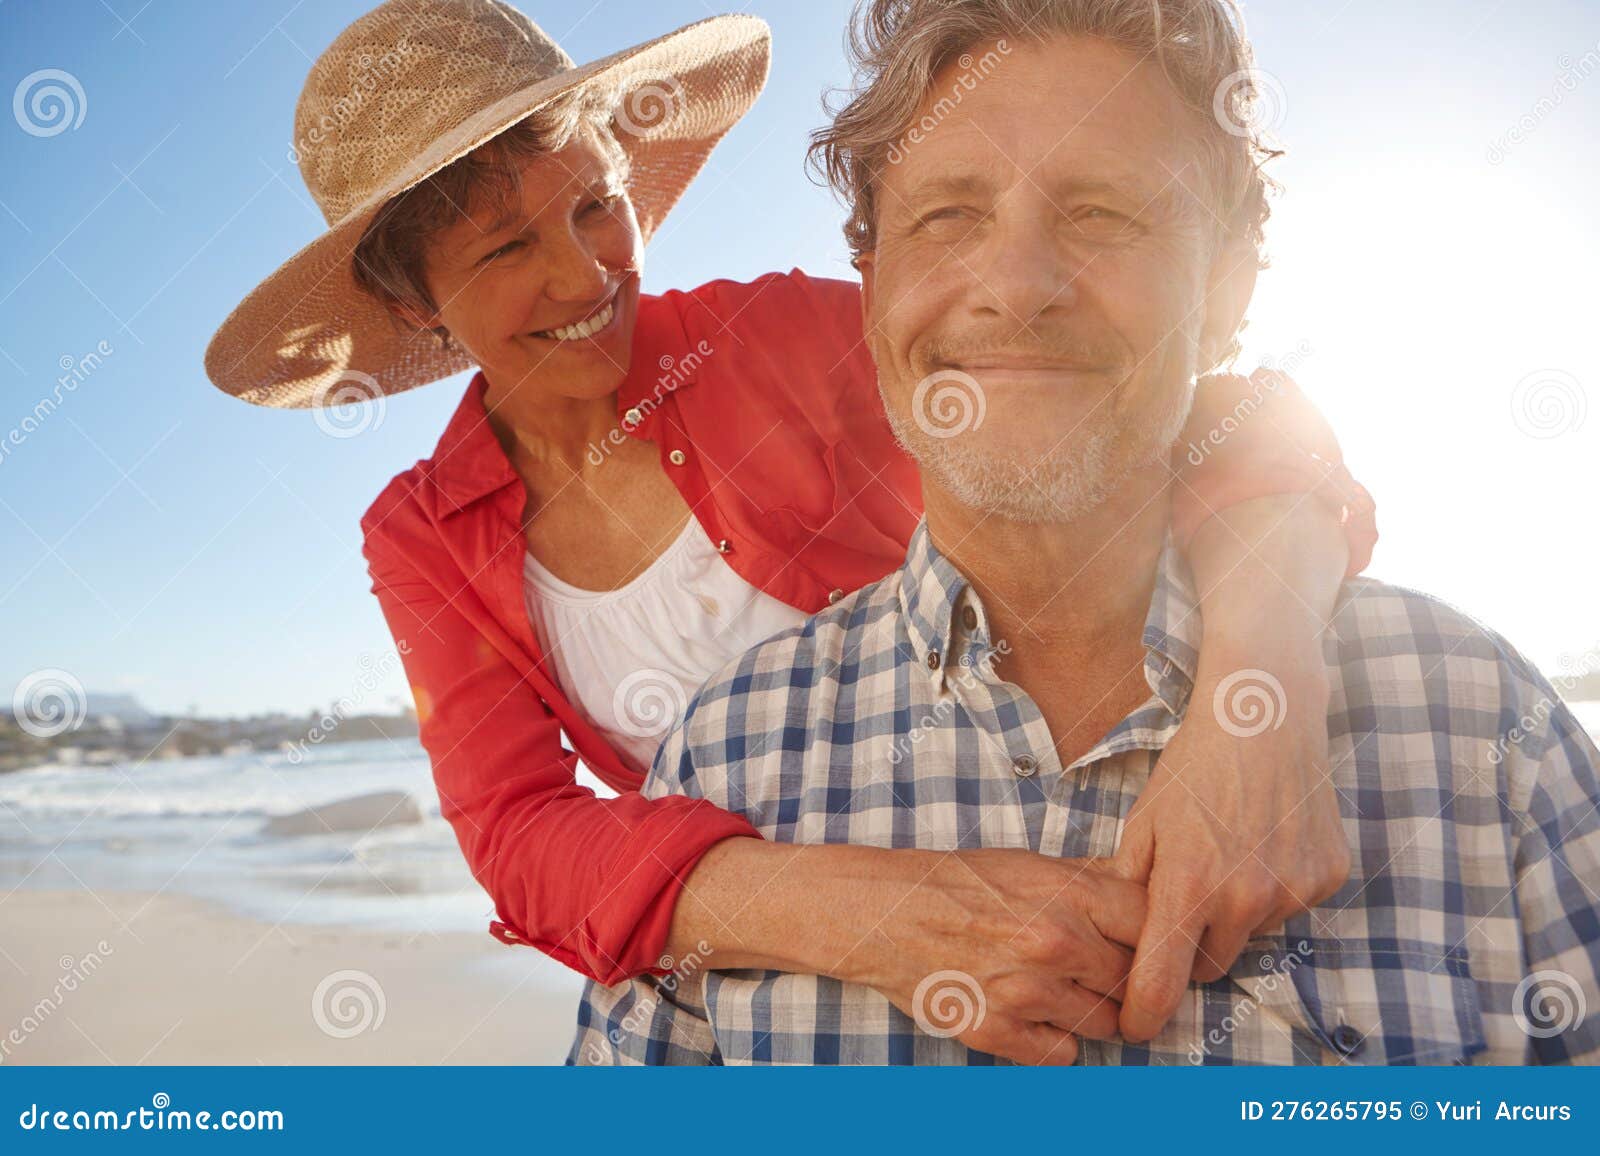 Hes My Man A Mature Couple Enjoying A Late Afternoon Walk On The Beach Stock Image Image Of